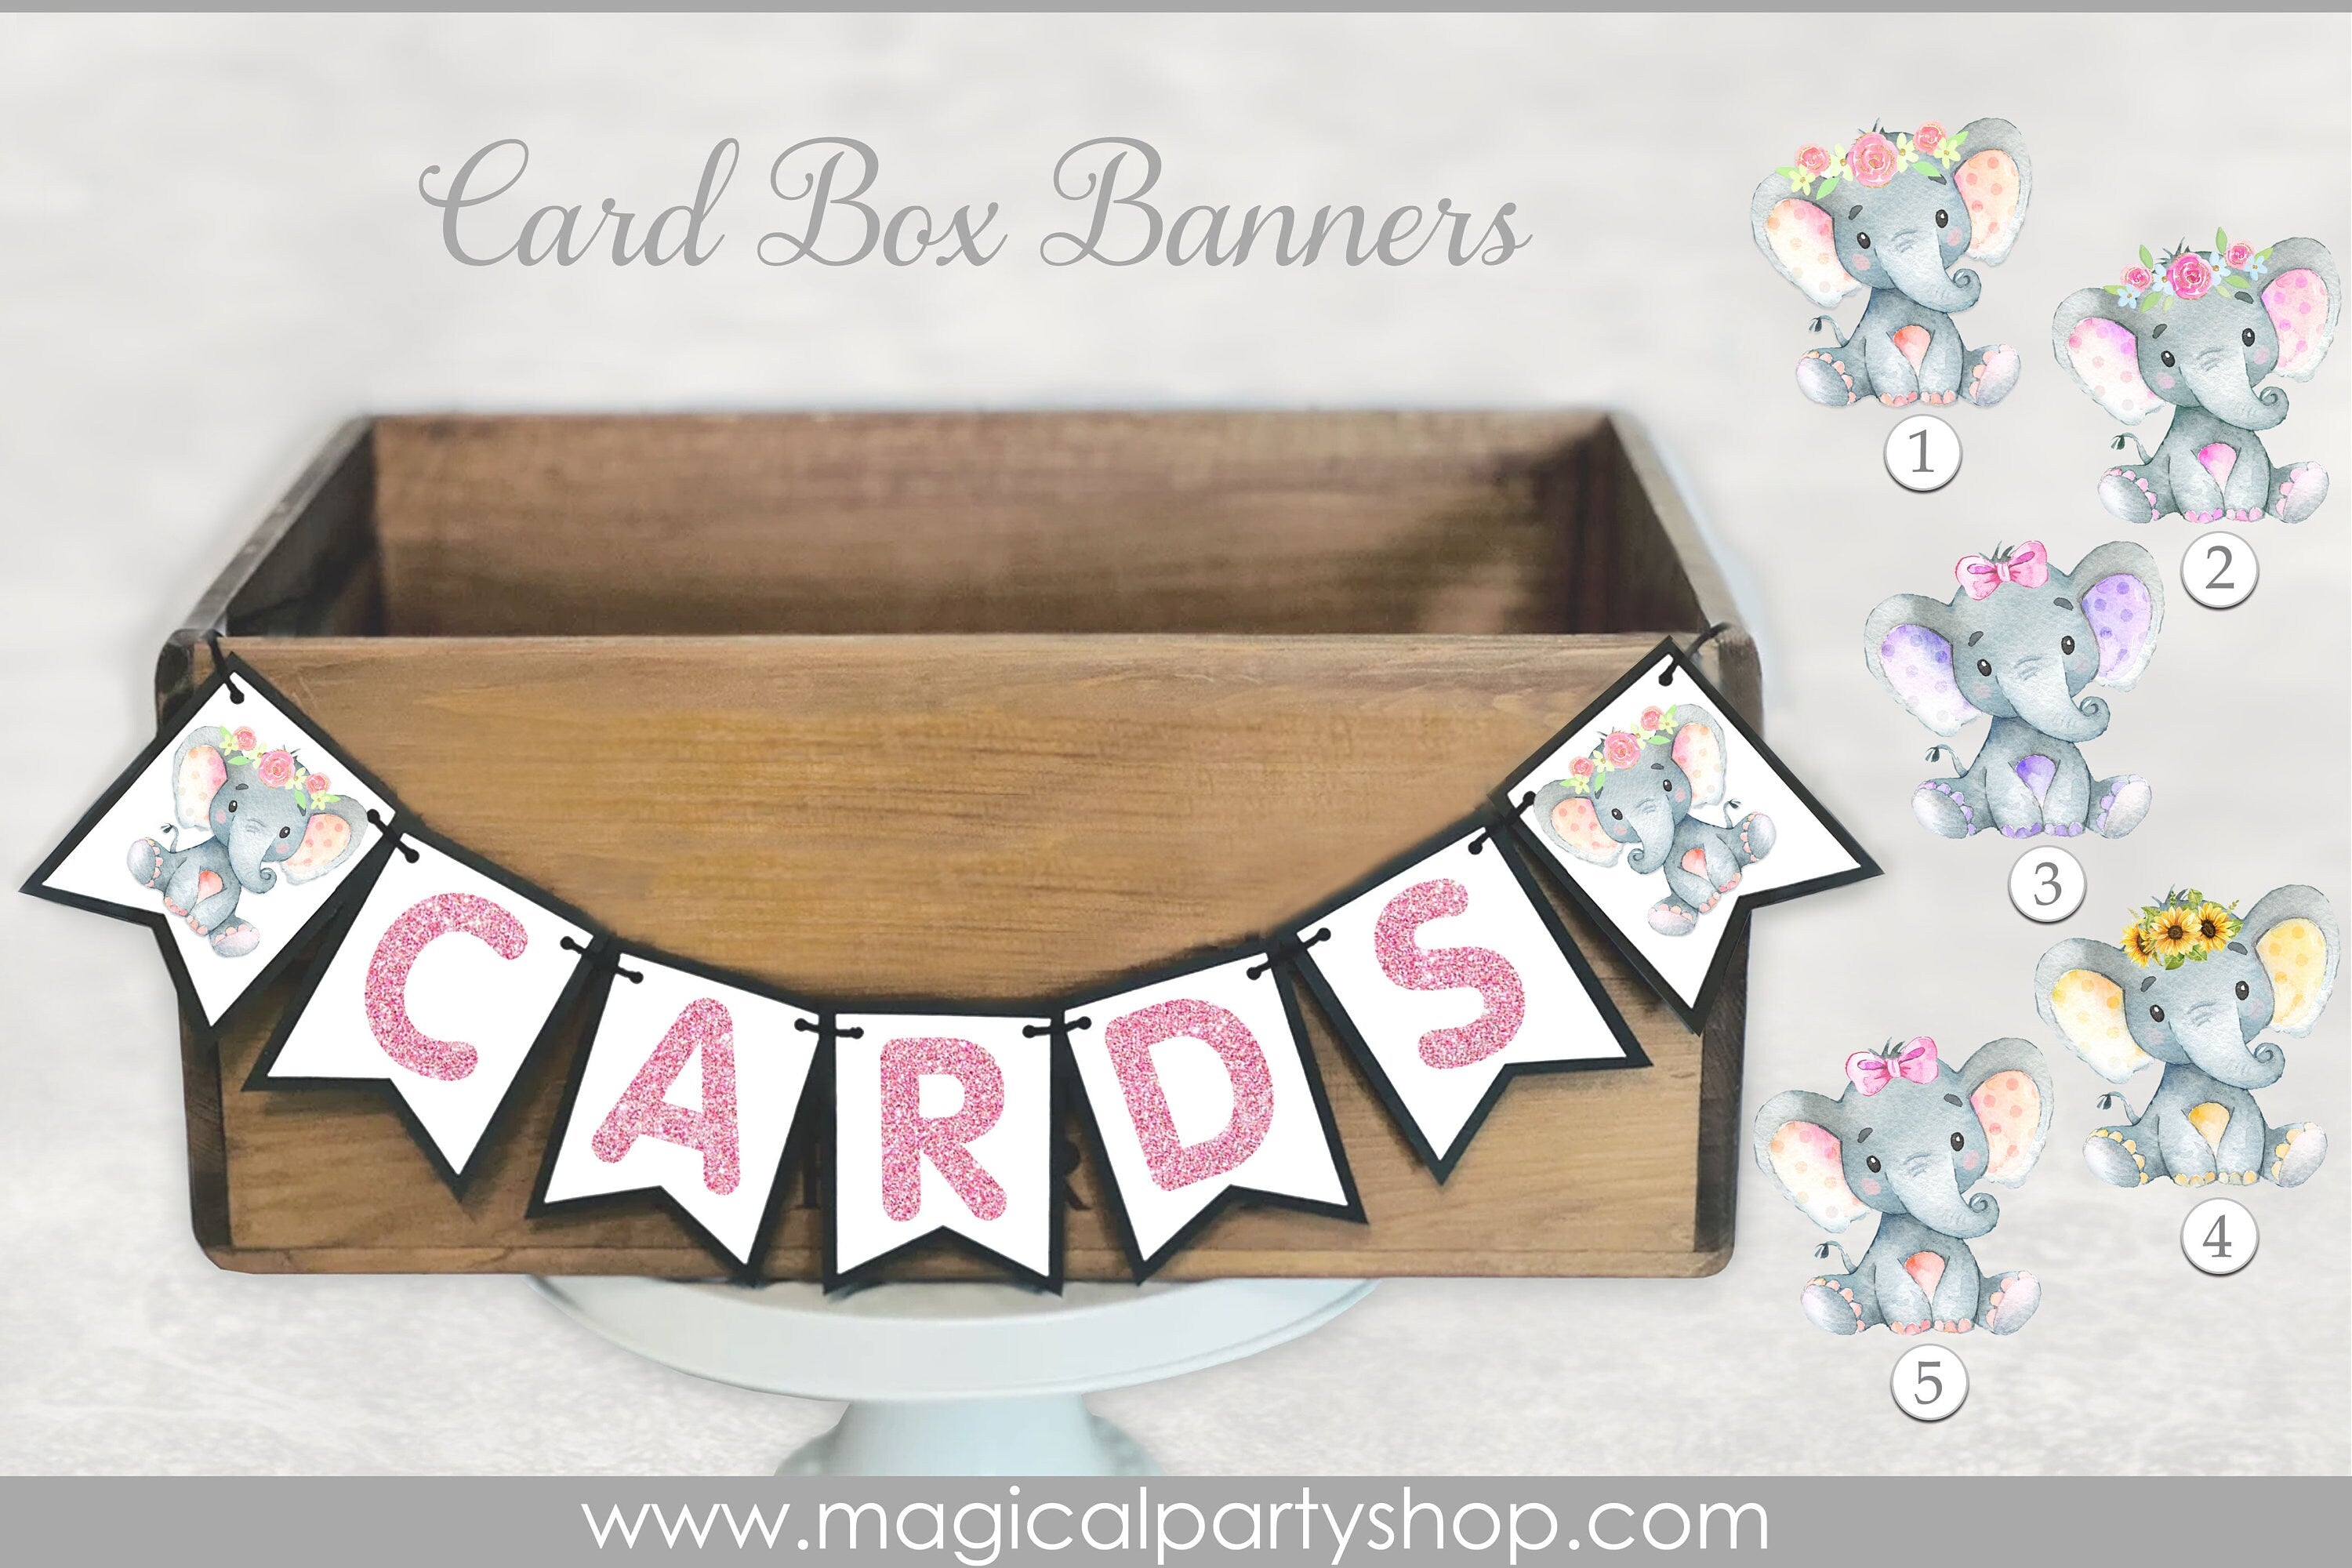 Elephant Baby Shower Card Box Banner | Elephant Party Decor | Elephant Cupcake Toppers | Girl Baby Shower | Sunflower Elephant | Its a Girl